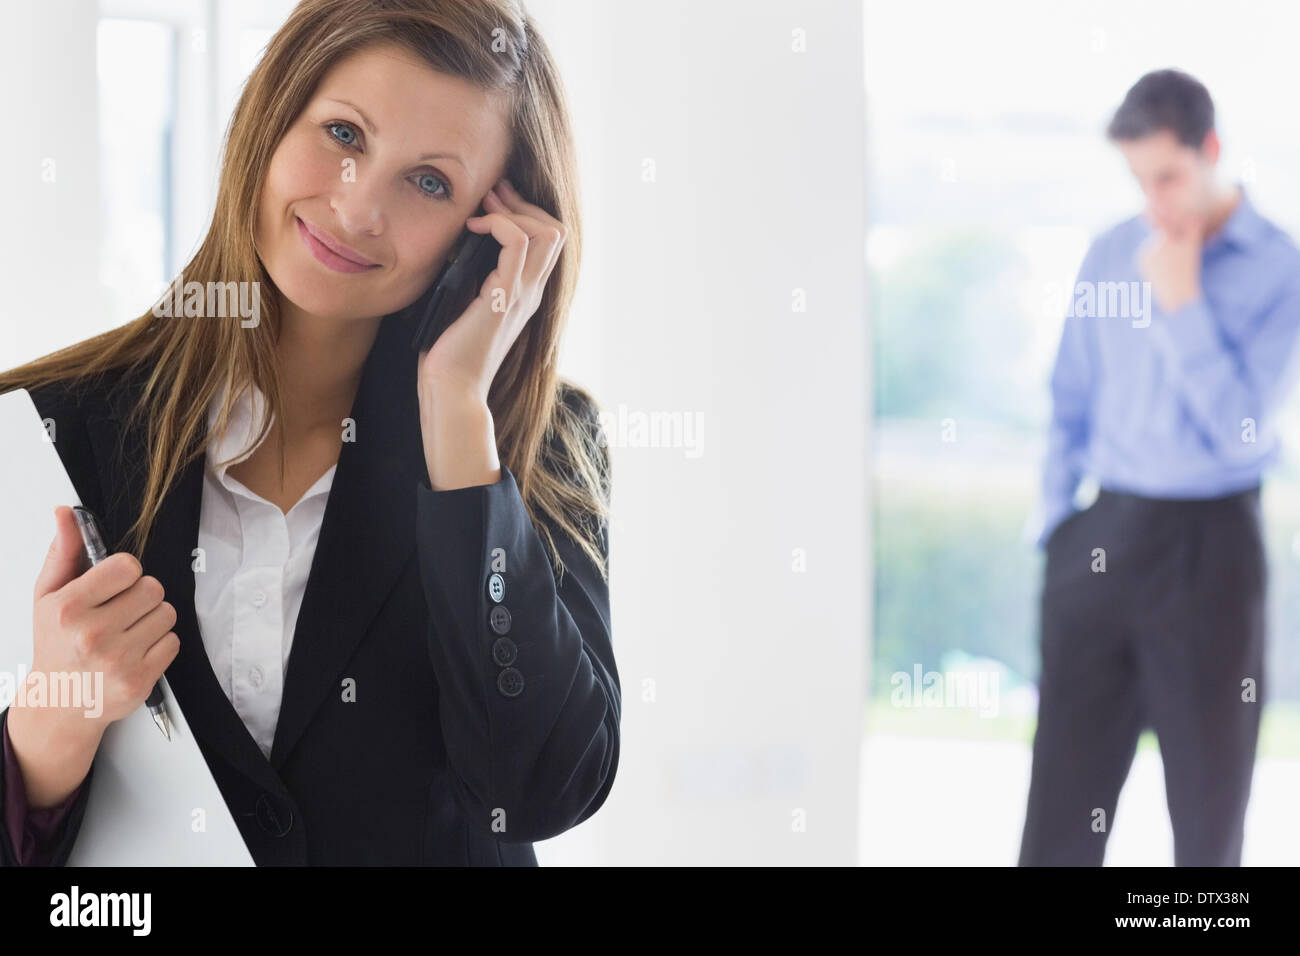 Estate agent on the phone with man deciding Stock Photo